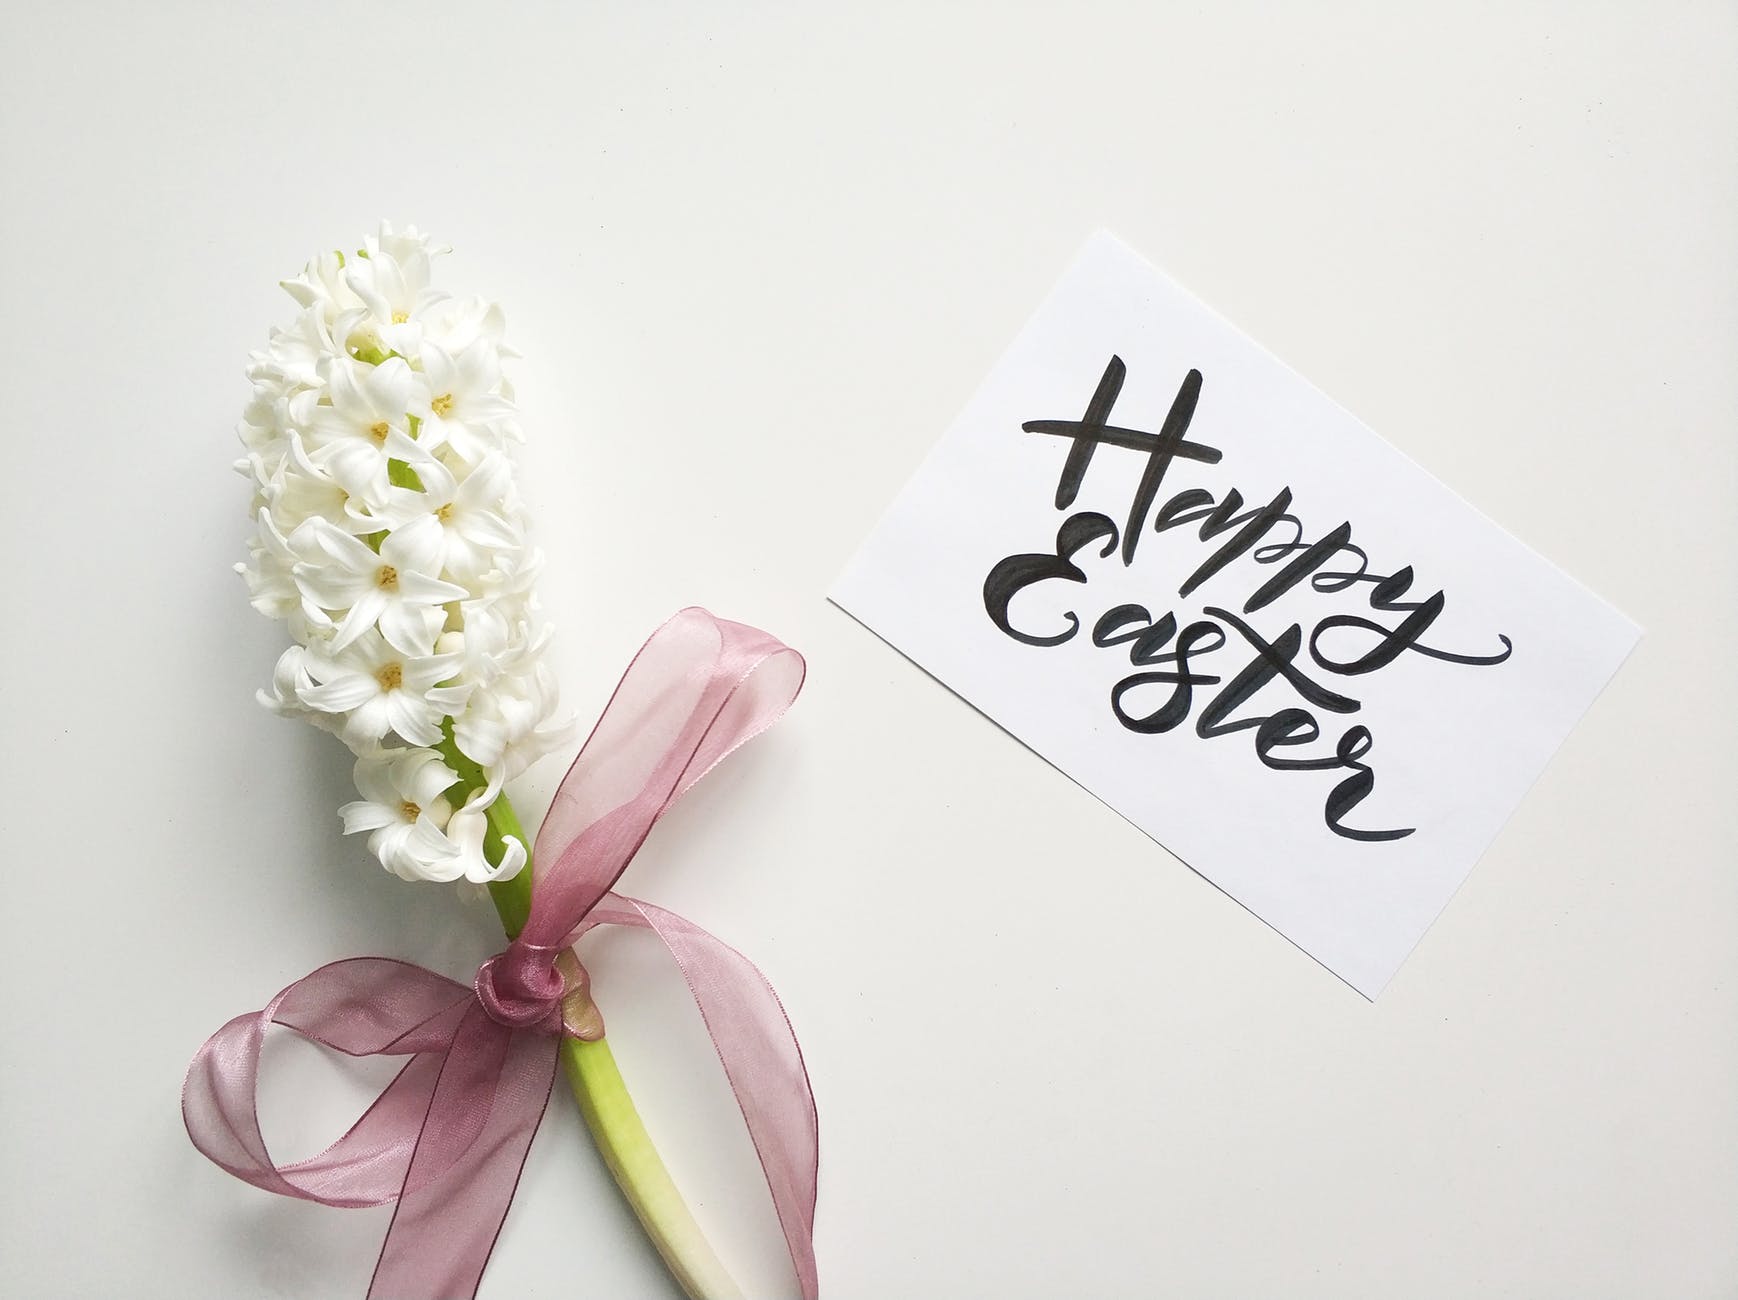 Happy Easter 2019 Images Wallpapers Quotes Messages